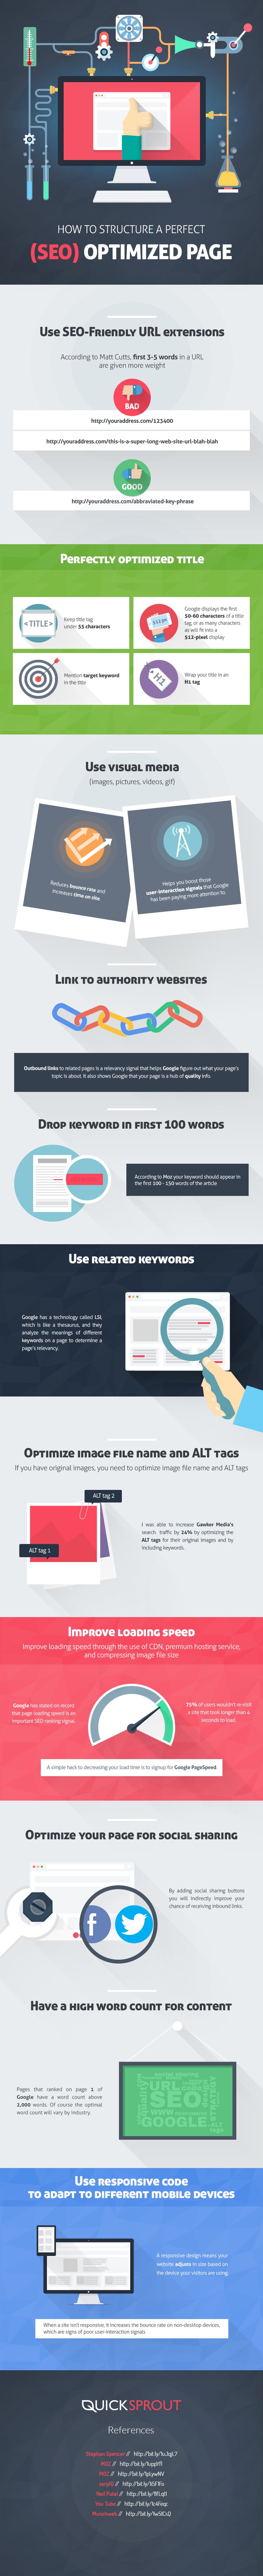 infographie-page-optimisee-seo